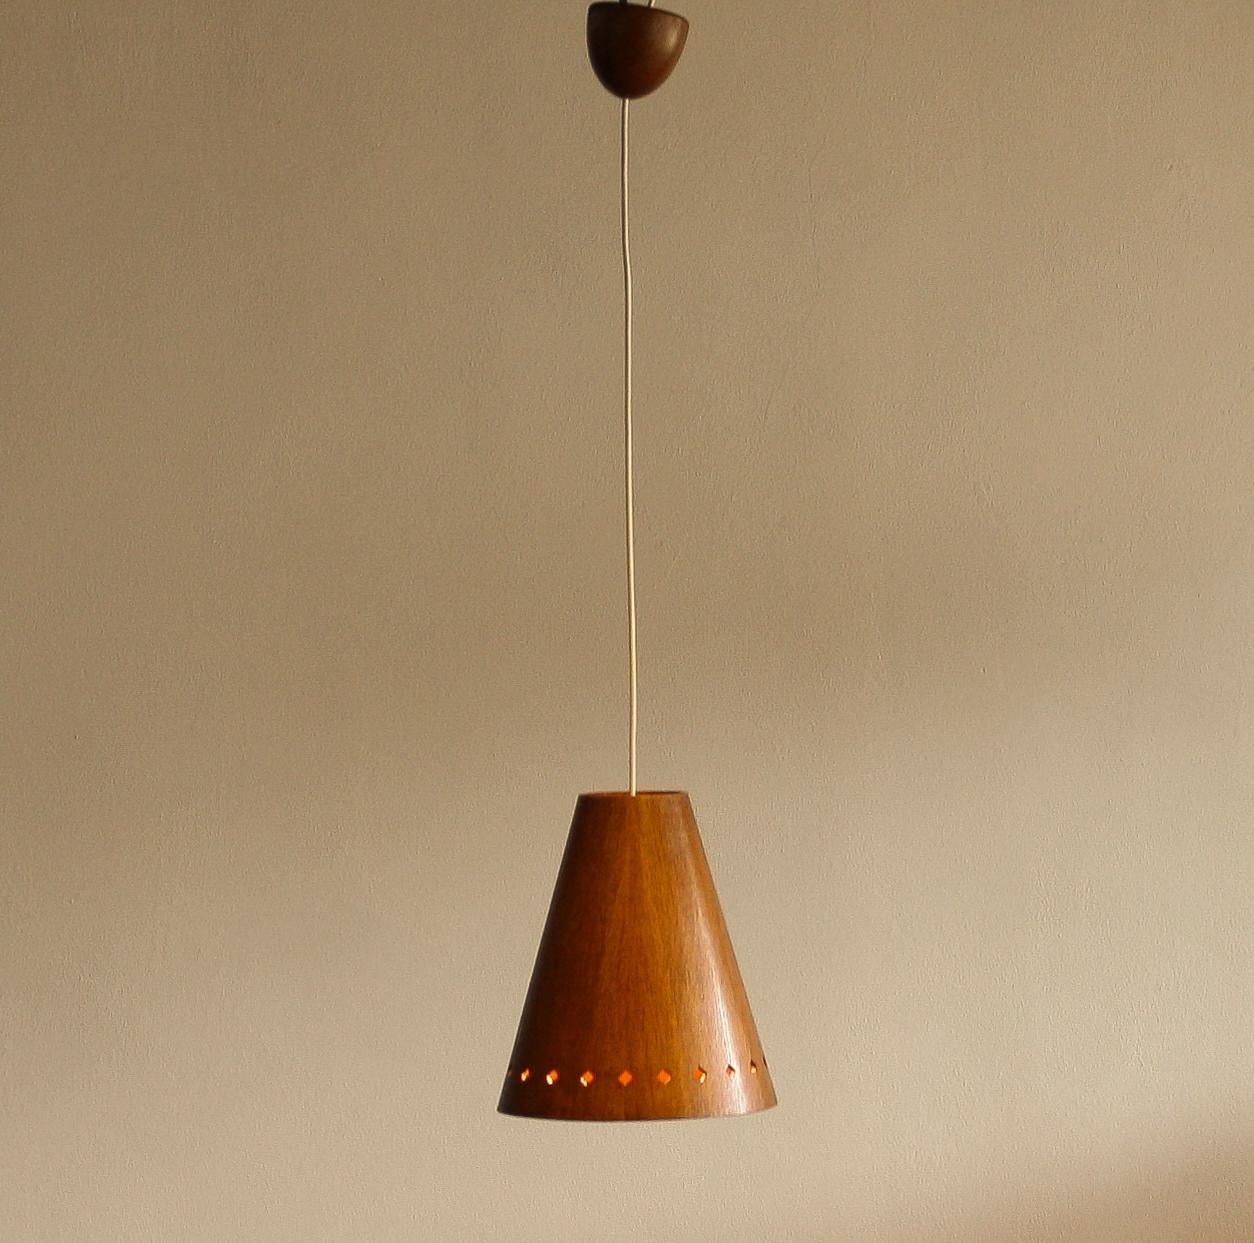 Very nice hanging lamp, model 565, made of wood designed by Uno & Östen Kristiansson for Luxus Vittsjö, Sweden.
The perforation on the shade gives it a beautiful shining.
The lamp is in very good condition.
Period 1950.
Dimension: H 30 cm, Ø 25